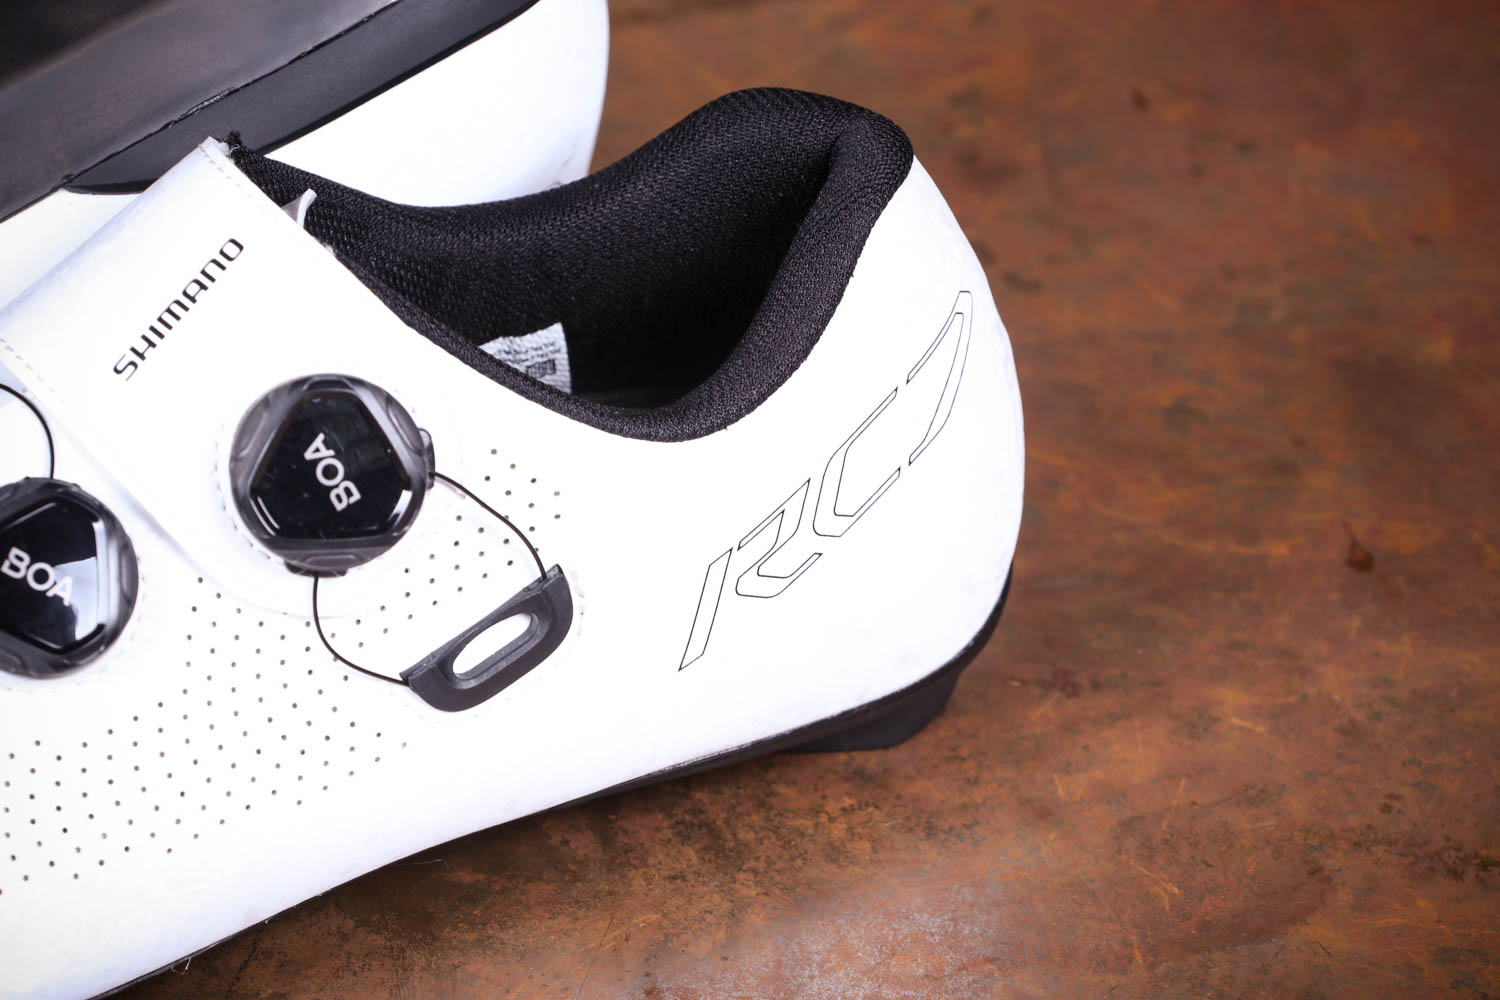 Review: Shimano RC7 (701) cycling shoes 